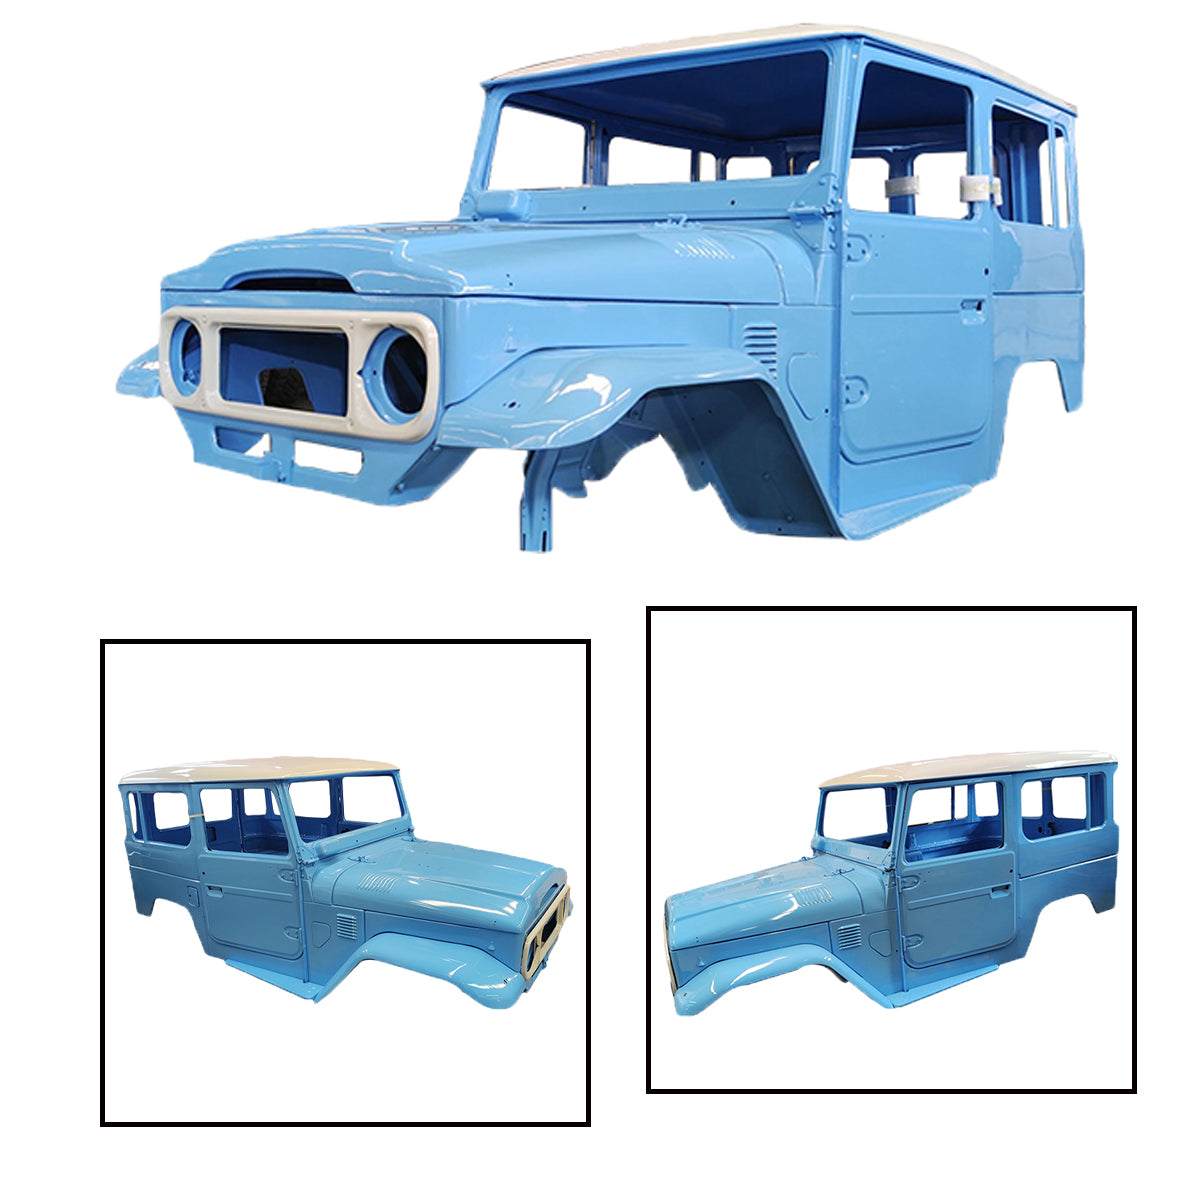 75-78 Complete Cab with Doors, with Body work and custom paint., for FJ40 Toyota Land Cruiser